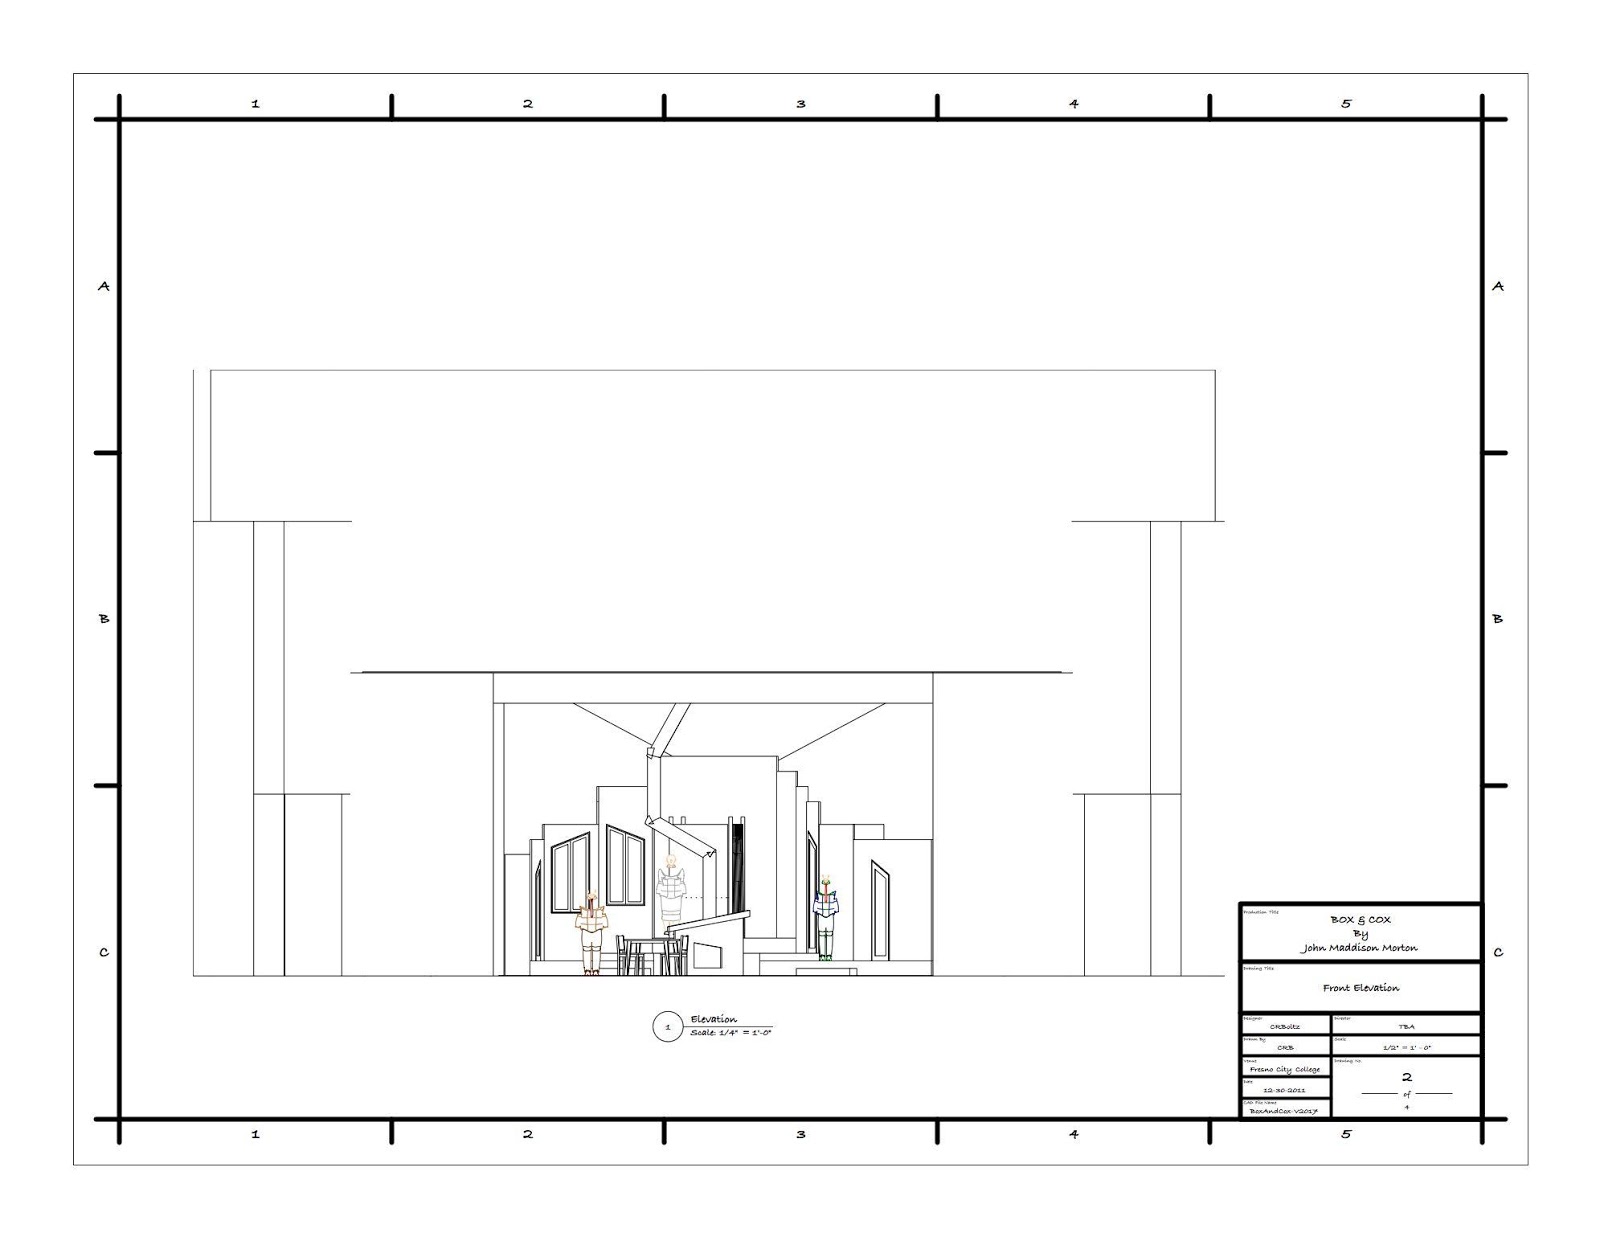 Elevation illustration, front view of stage